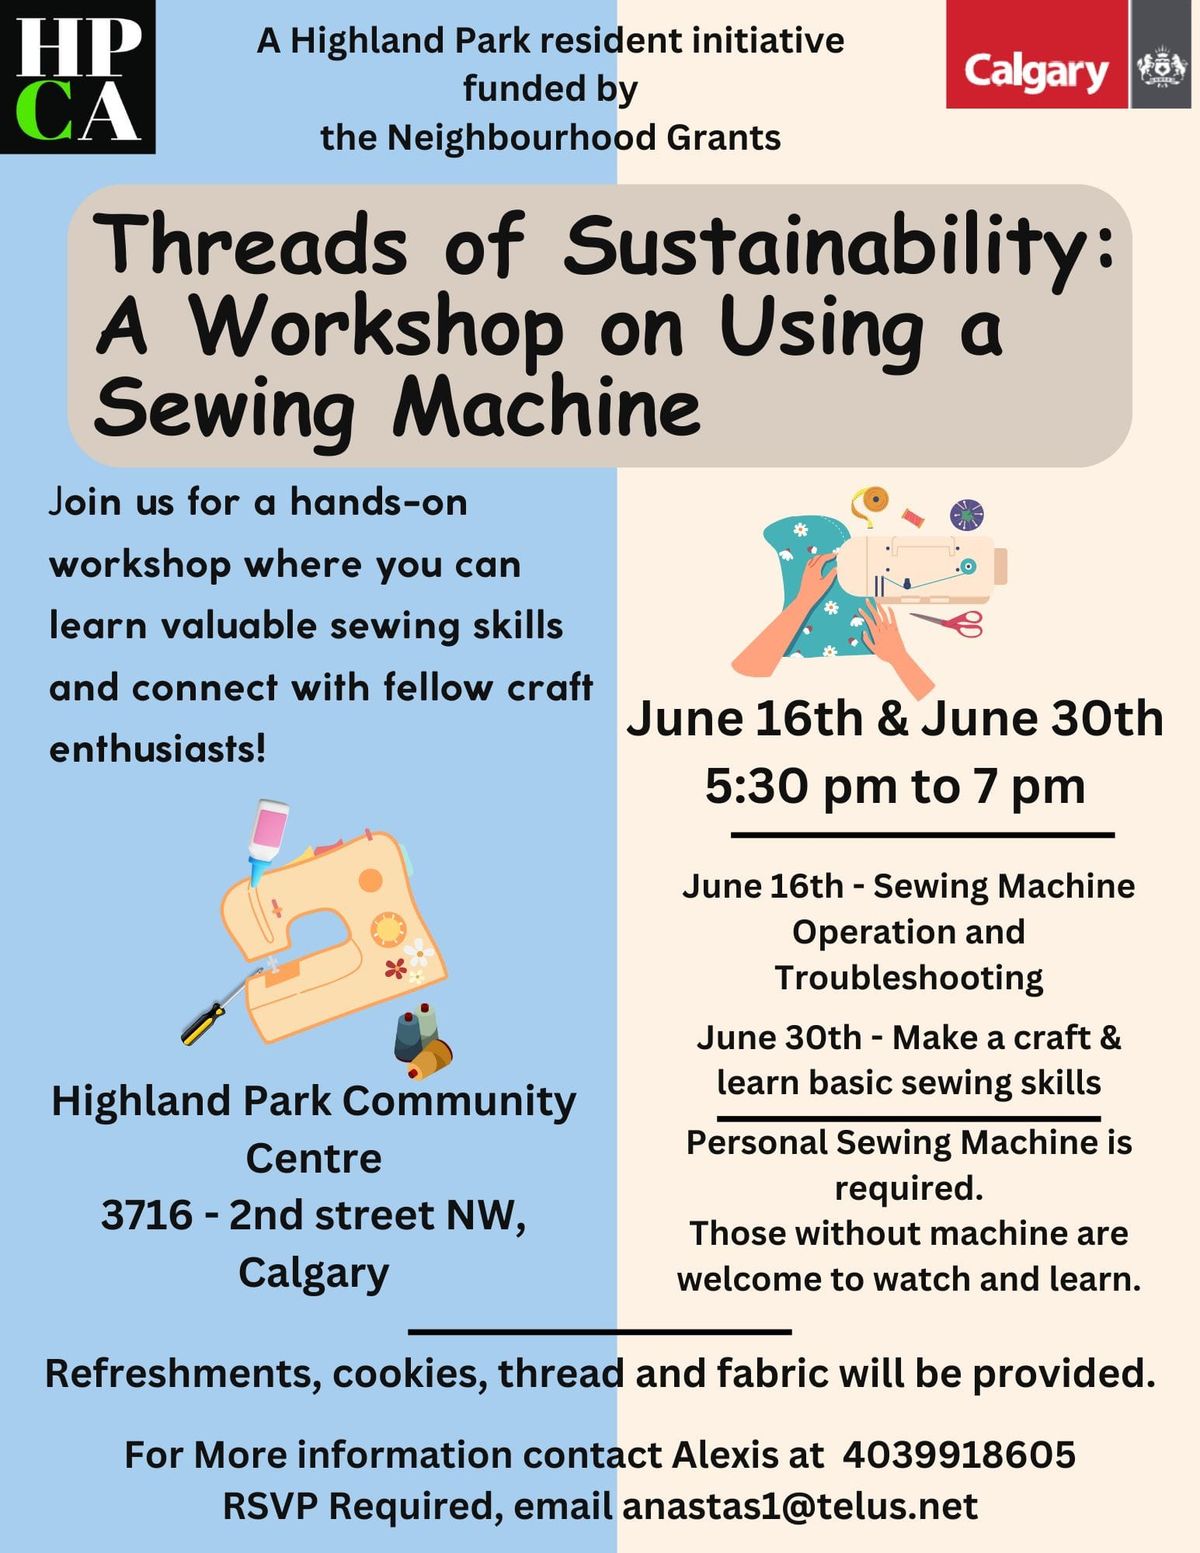 Threads of Sustainability: A Workshop on using a Sewing Machine